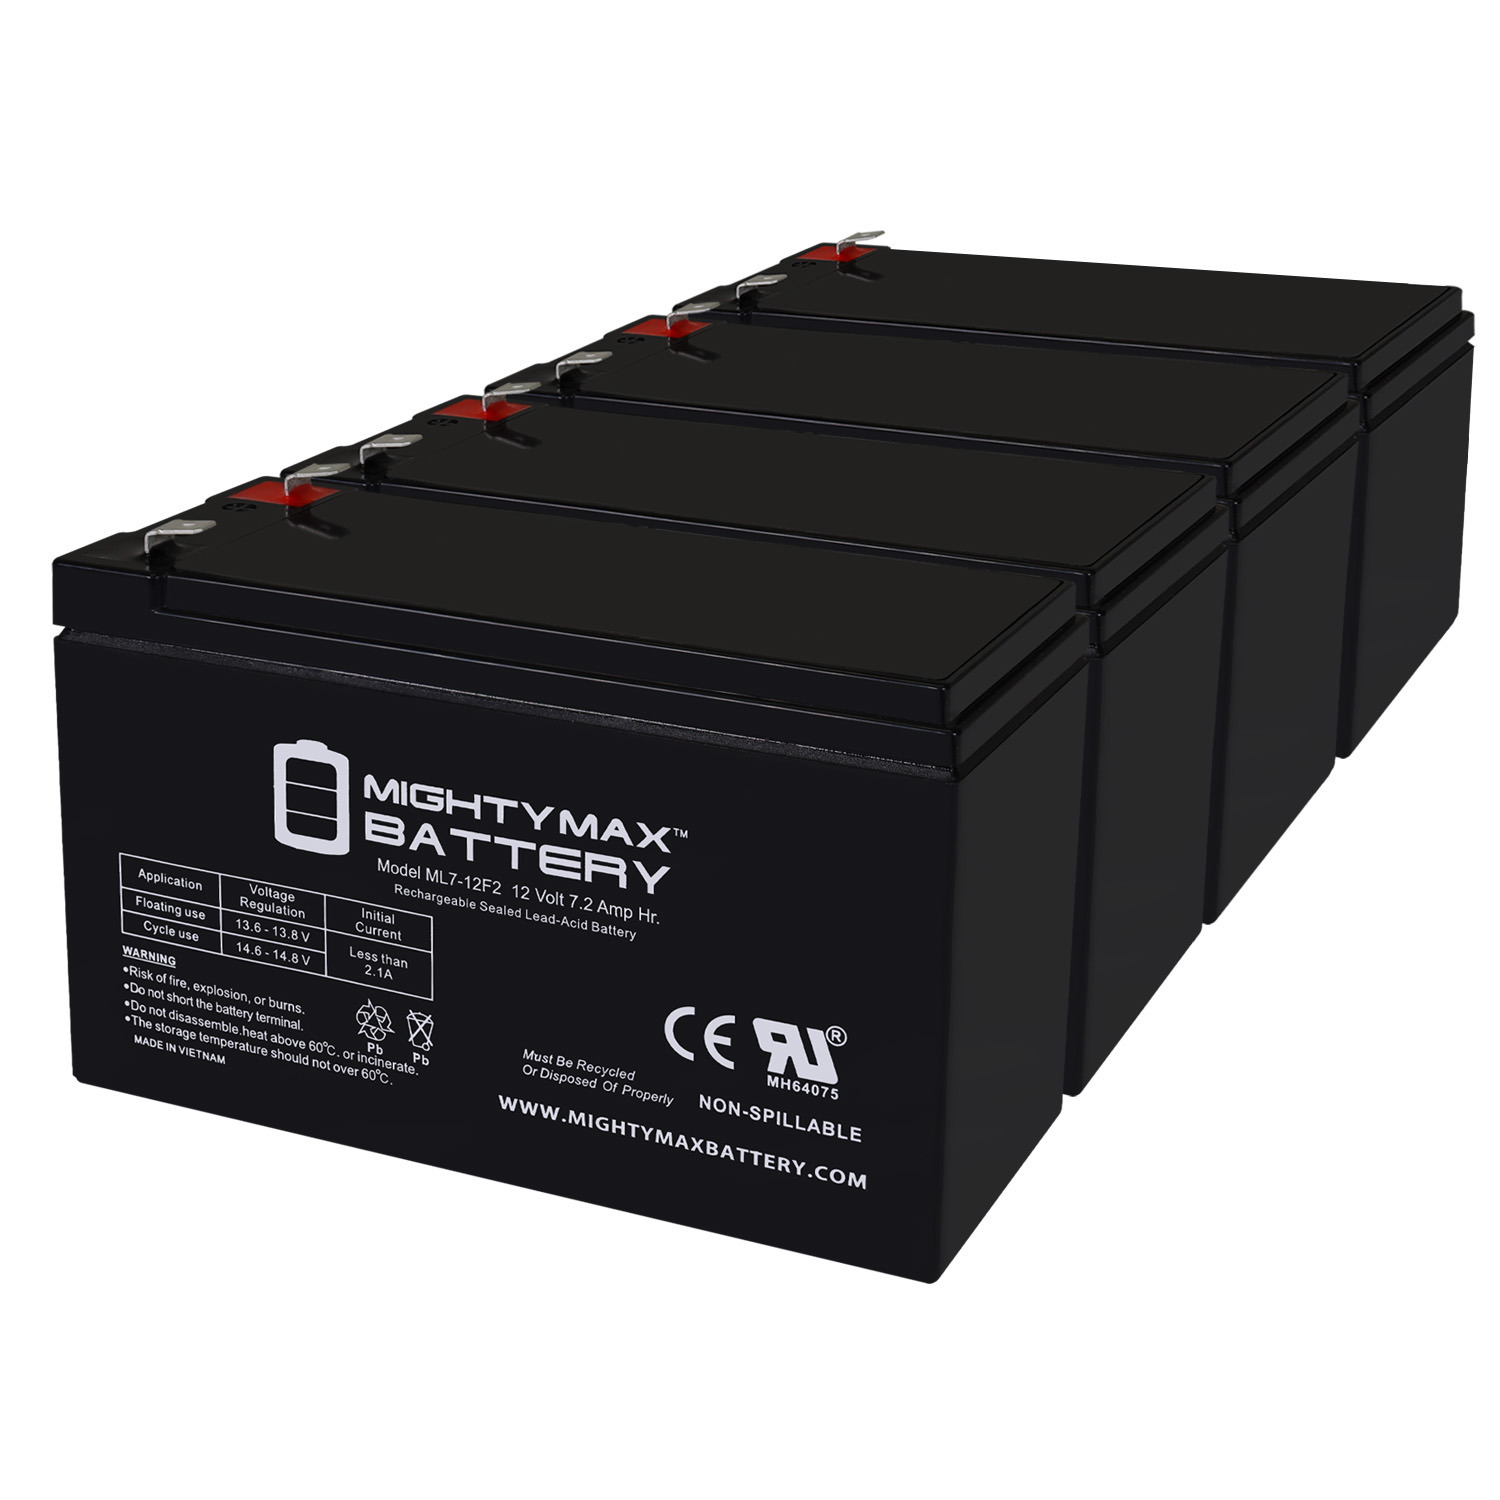 12V 7Ah F2 Replacement Battery for Minuteman PML 9002 - 4 Pack